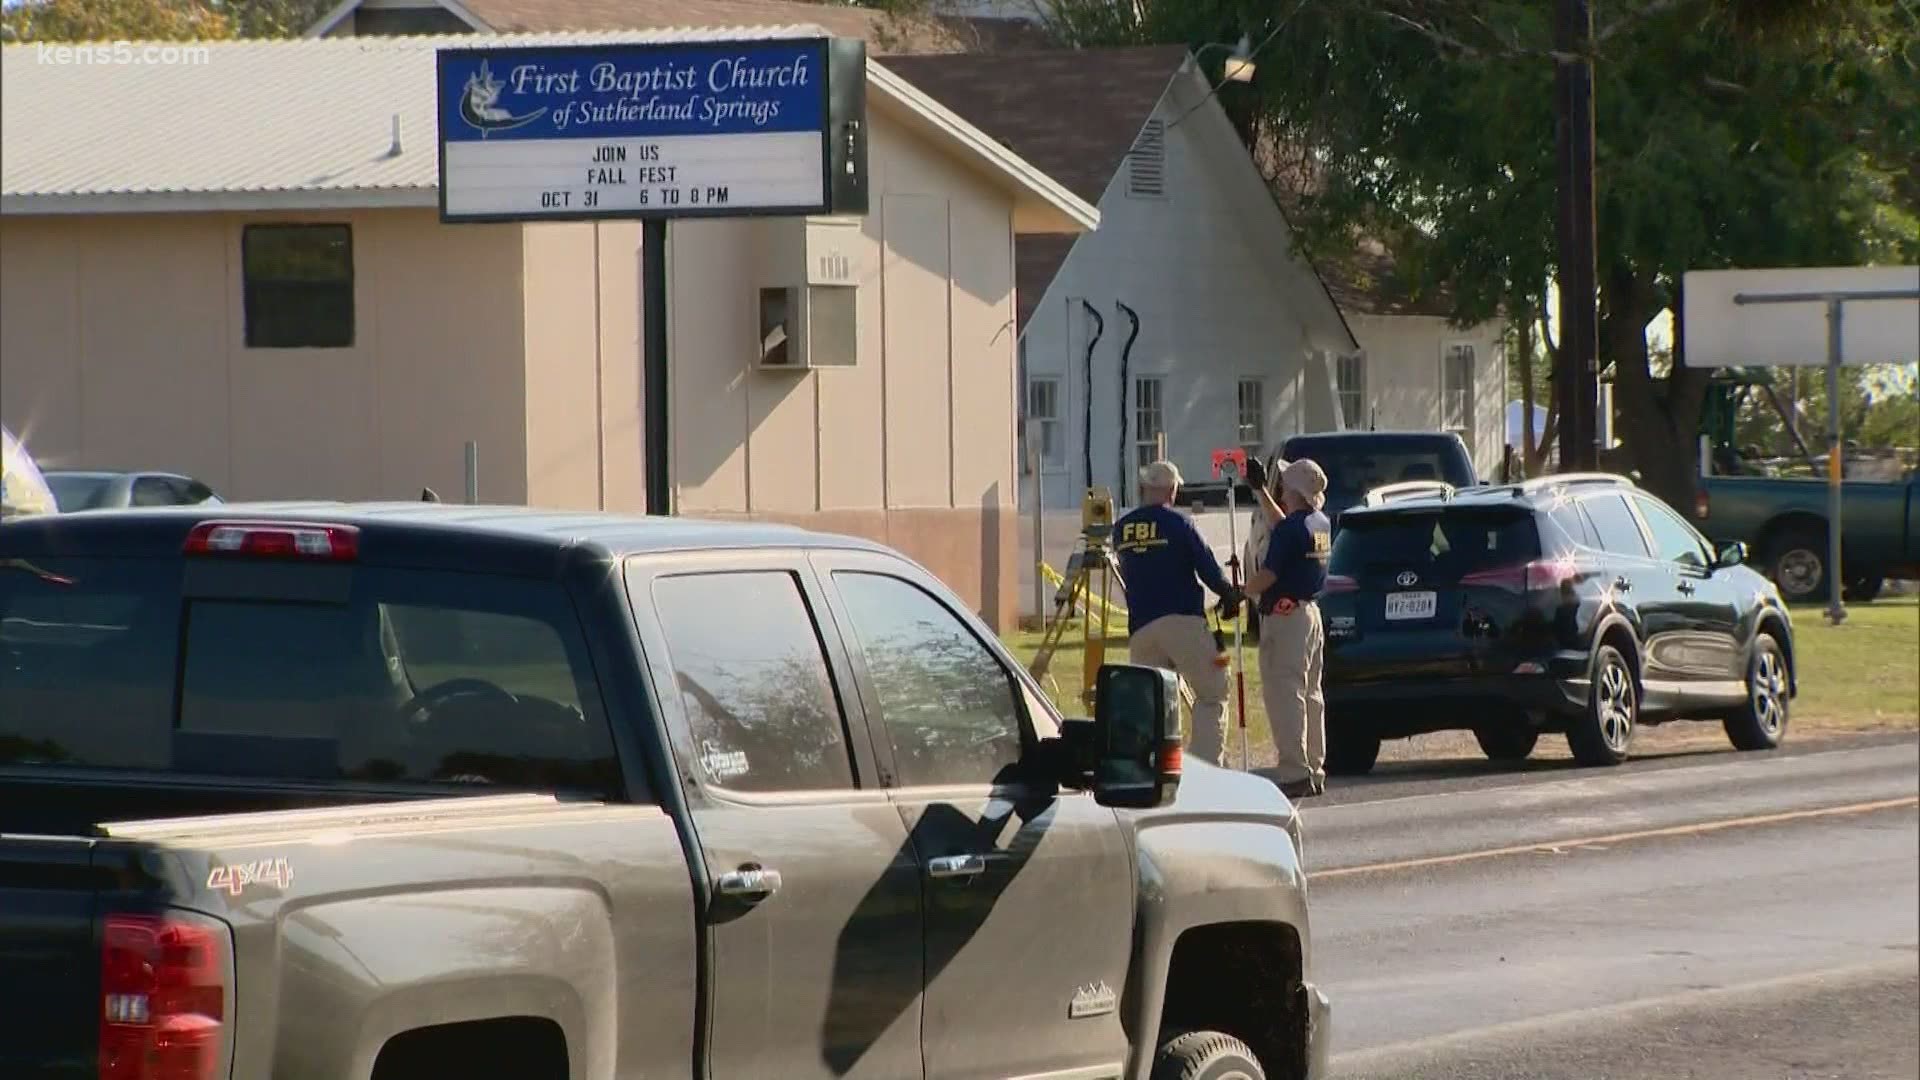 A federal judge has ruled that the U.S. Air Force is mostly responsible for a former serviceman killing more than two dozen people at a Texas church in 2017.